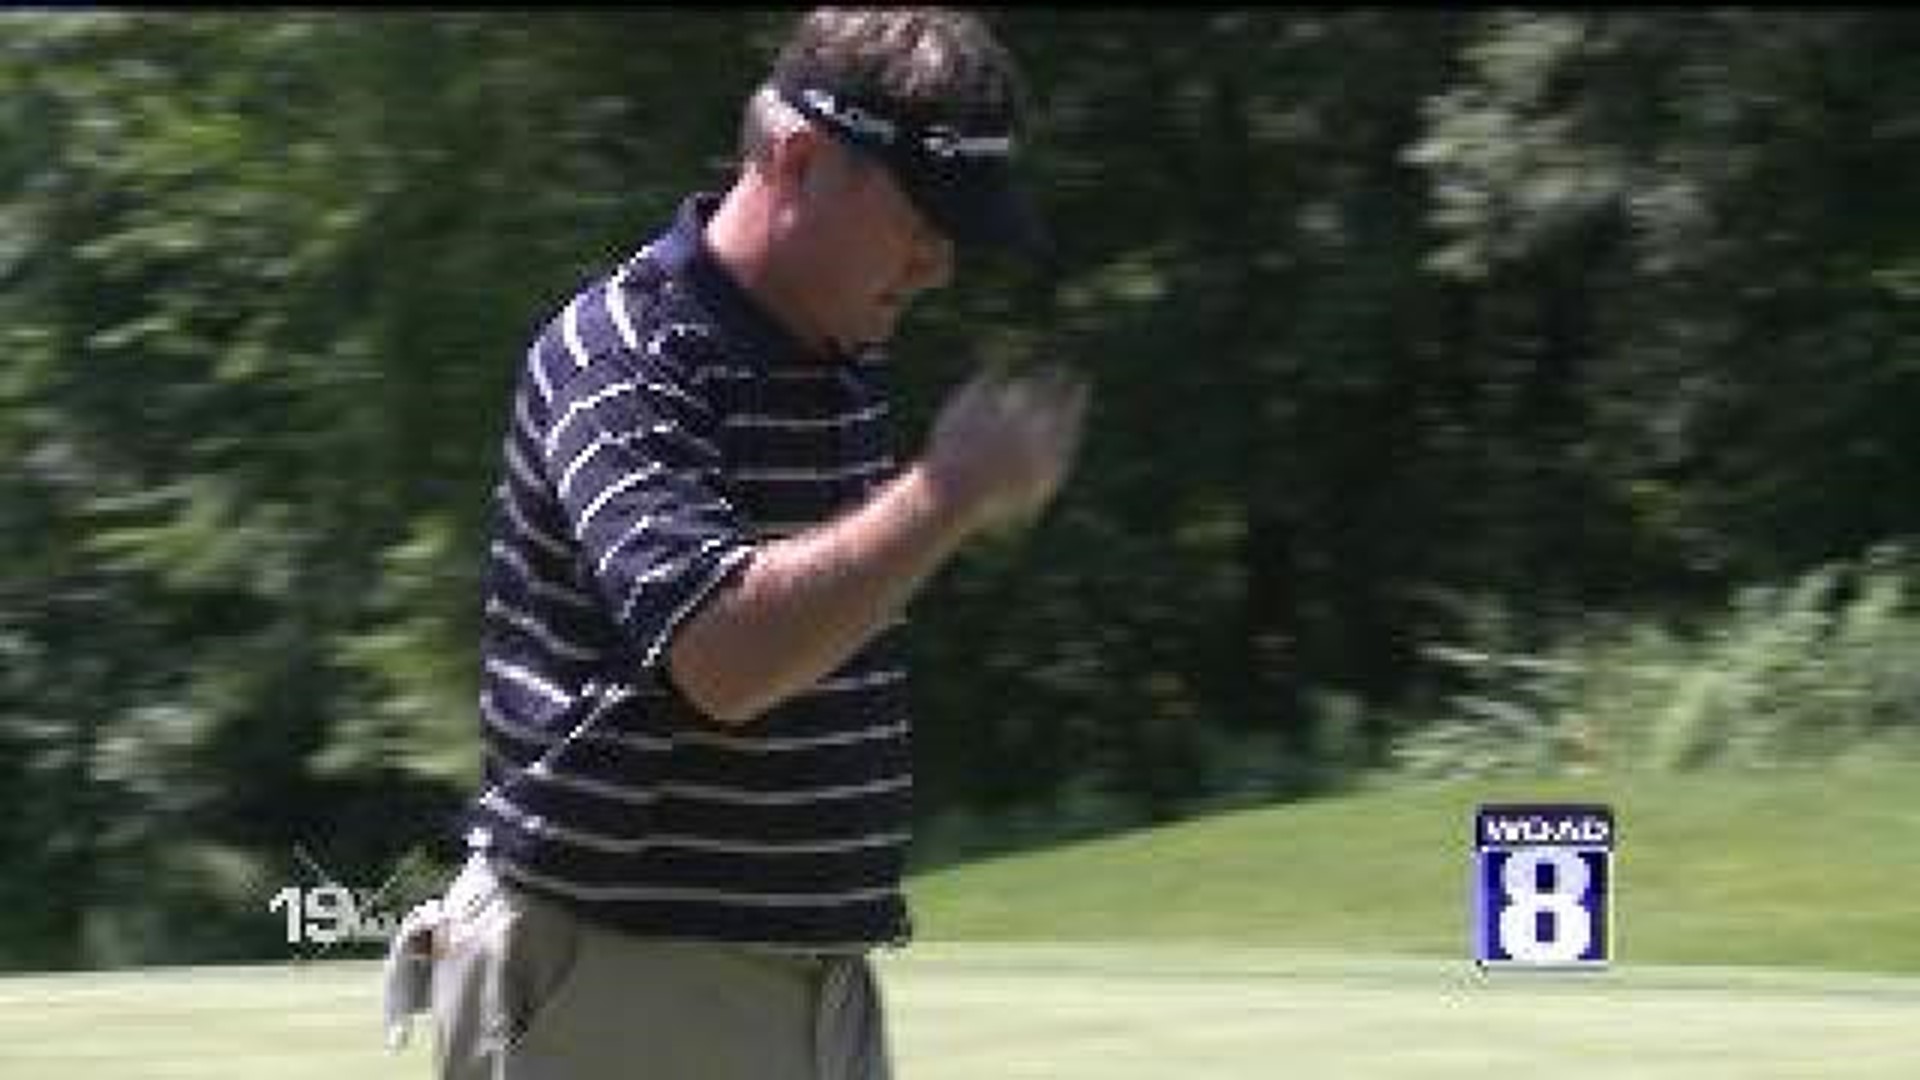 Golfers bugged by bugs